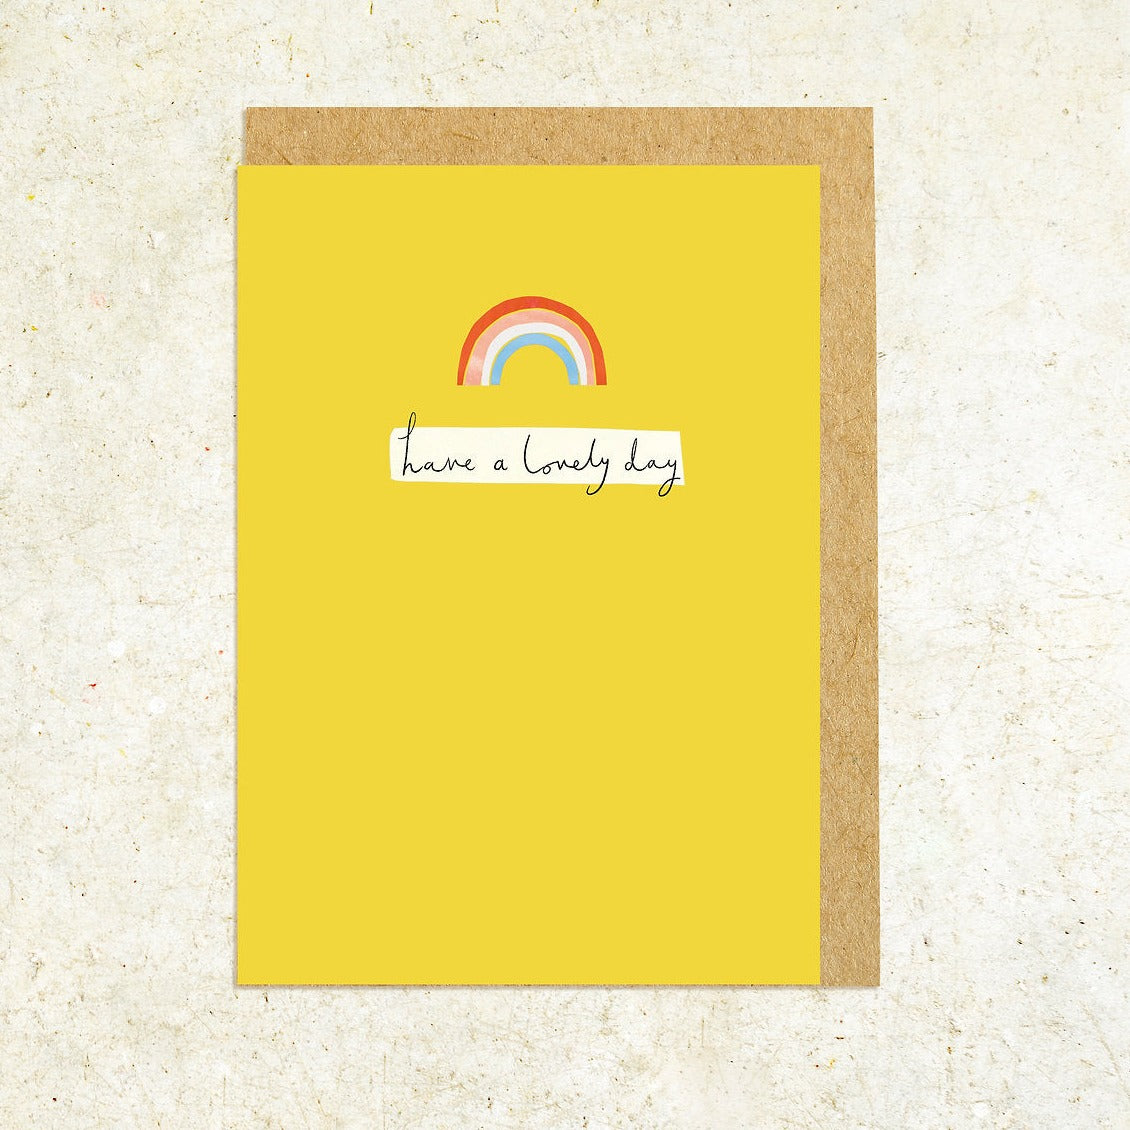 Shrew & Co Have a Lovely Day Card. Made in the U.K and printed on 100% recycled paper